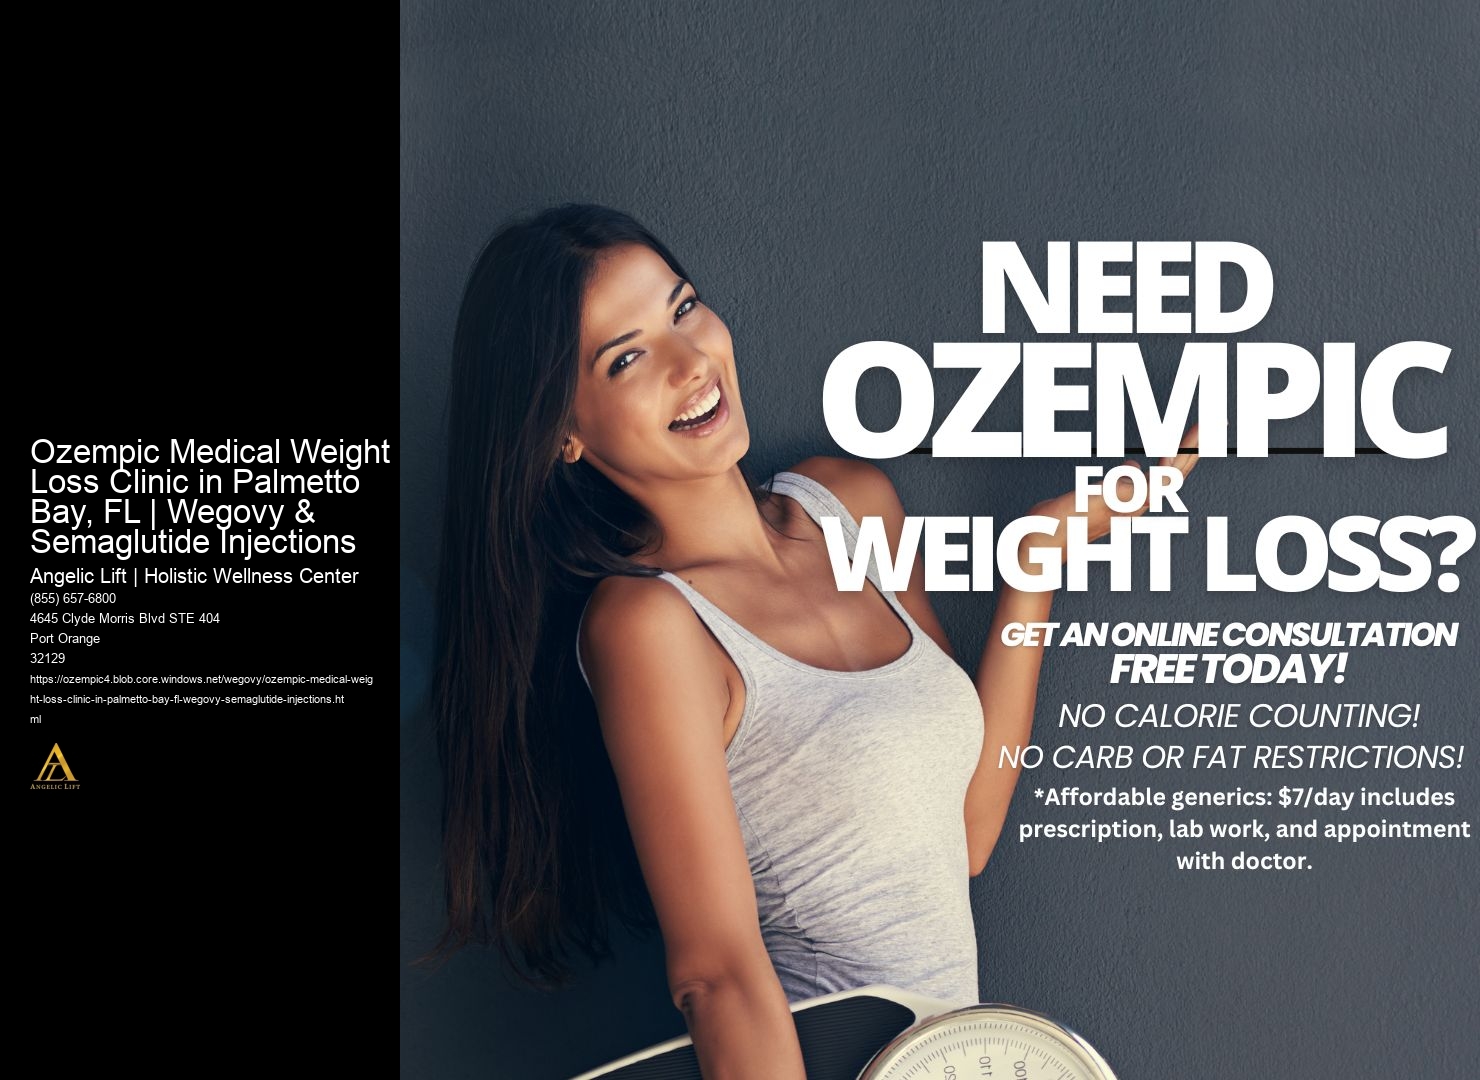 Ozempic Medical Weight Loss Clinic in Palmetto Bay, FL | Wegovy & Semaglutide Injections